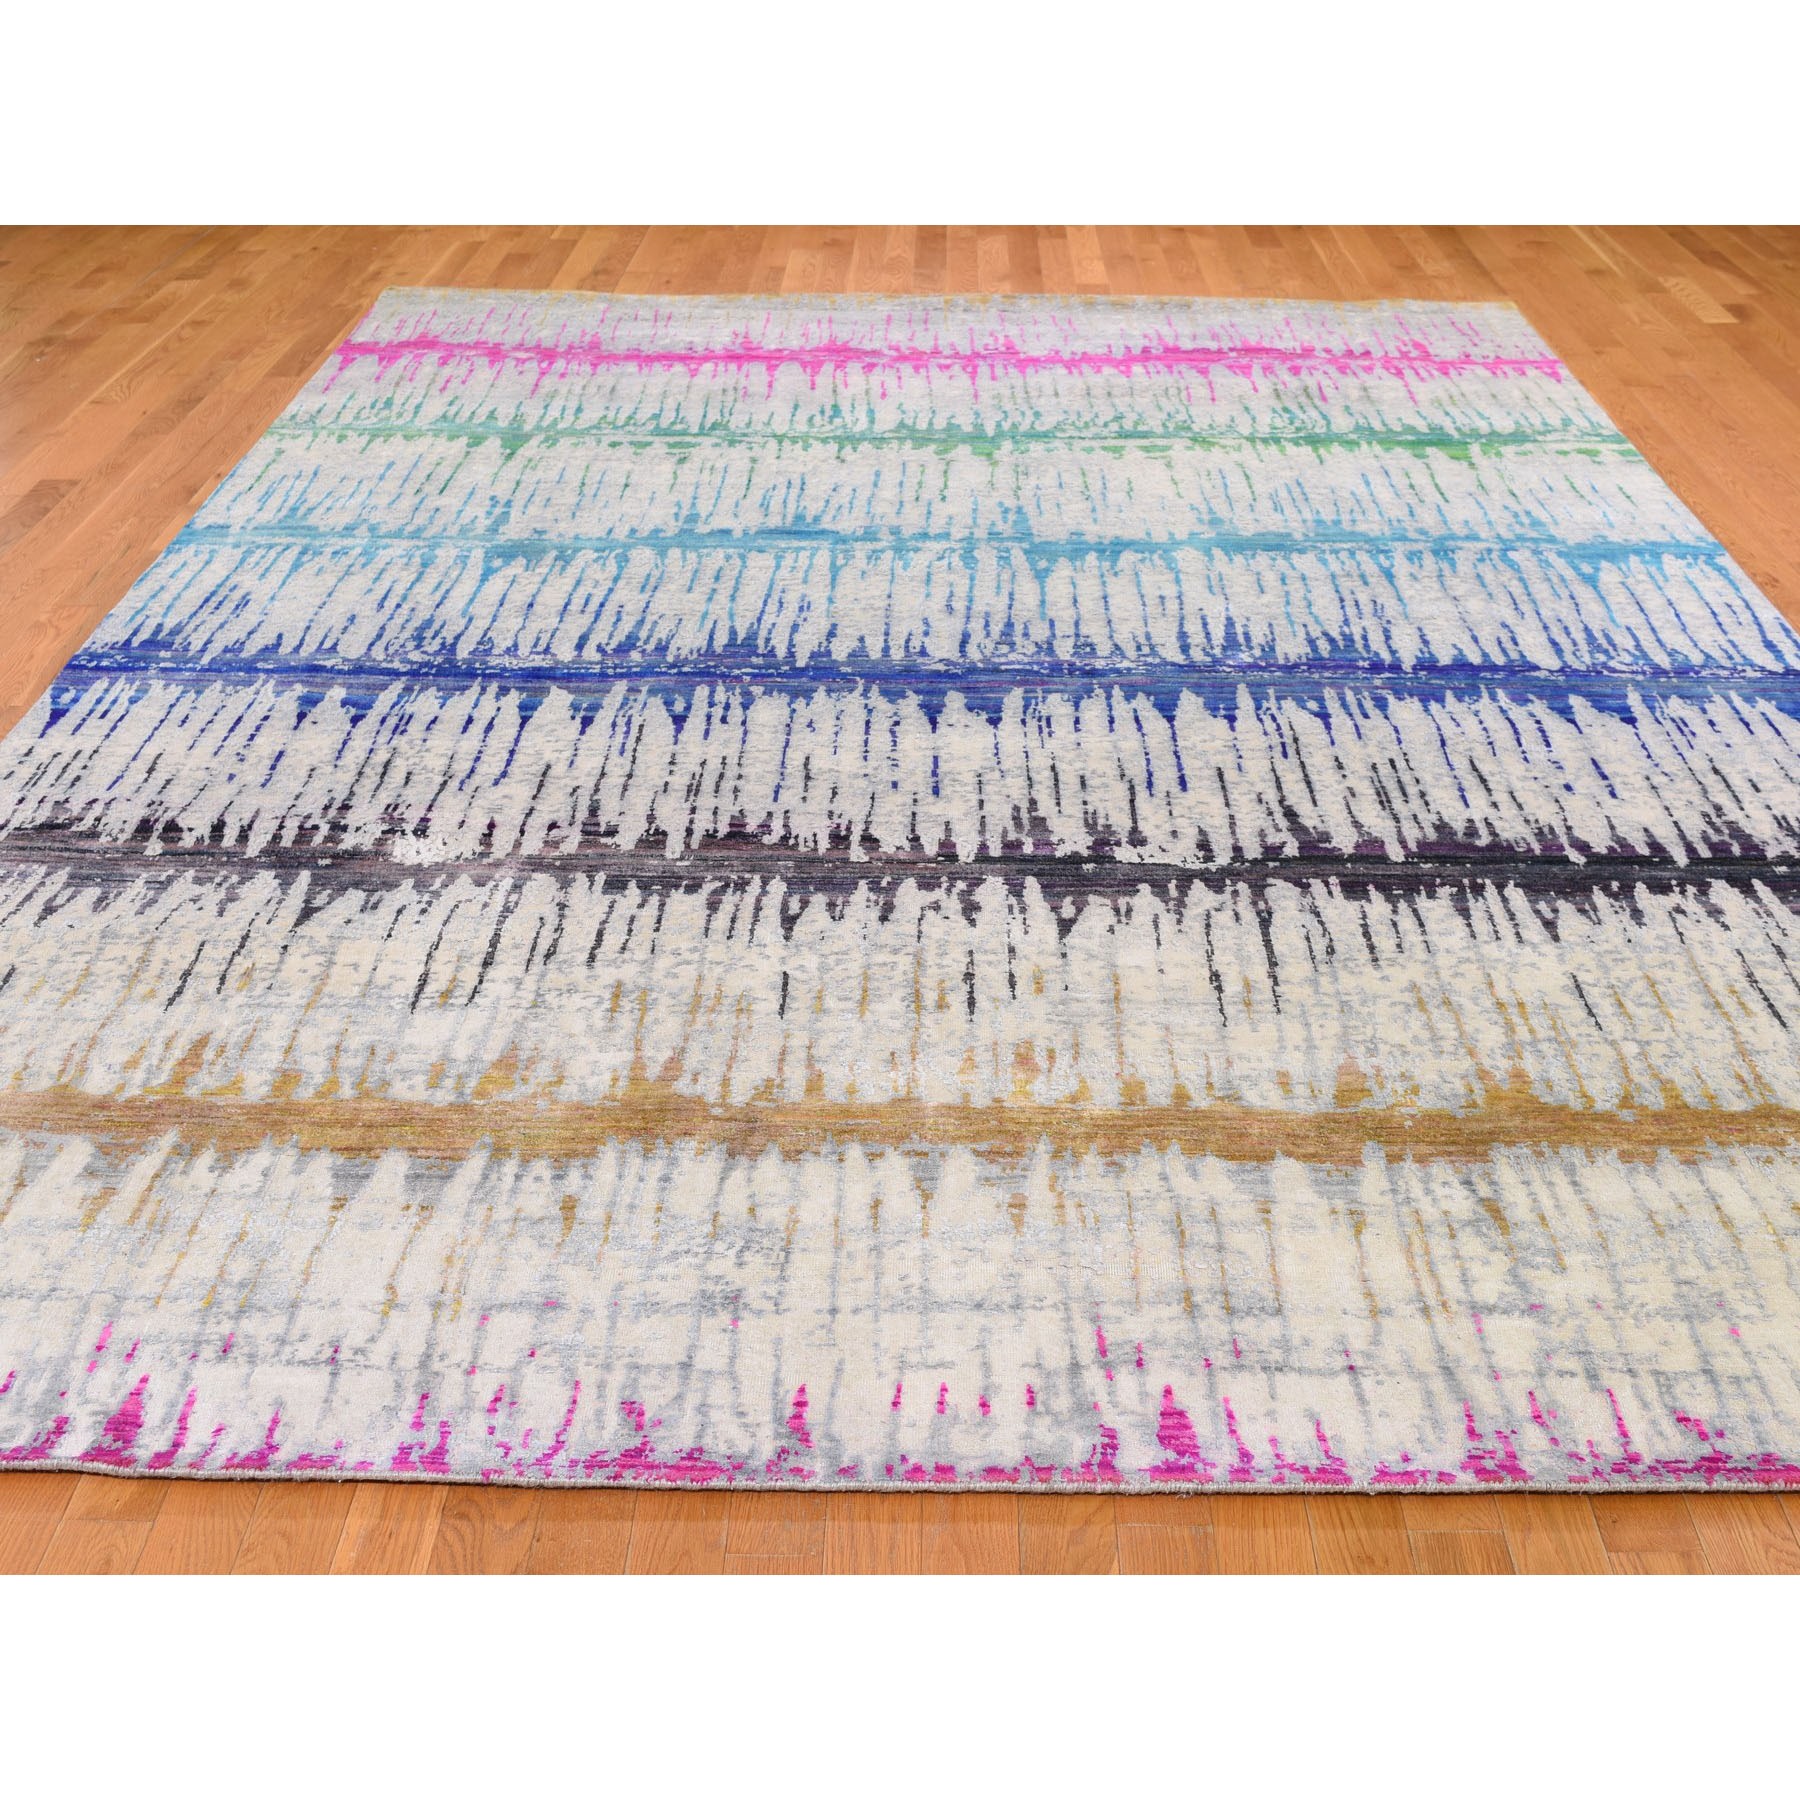 9-1 x12-3  THE CARDIAC Sari Silk with Textured Wool Hand-Knotted Oriental Rug 